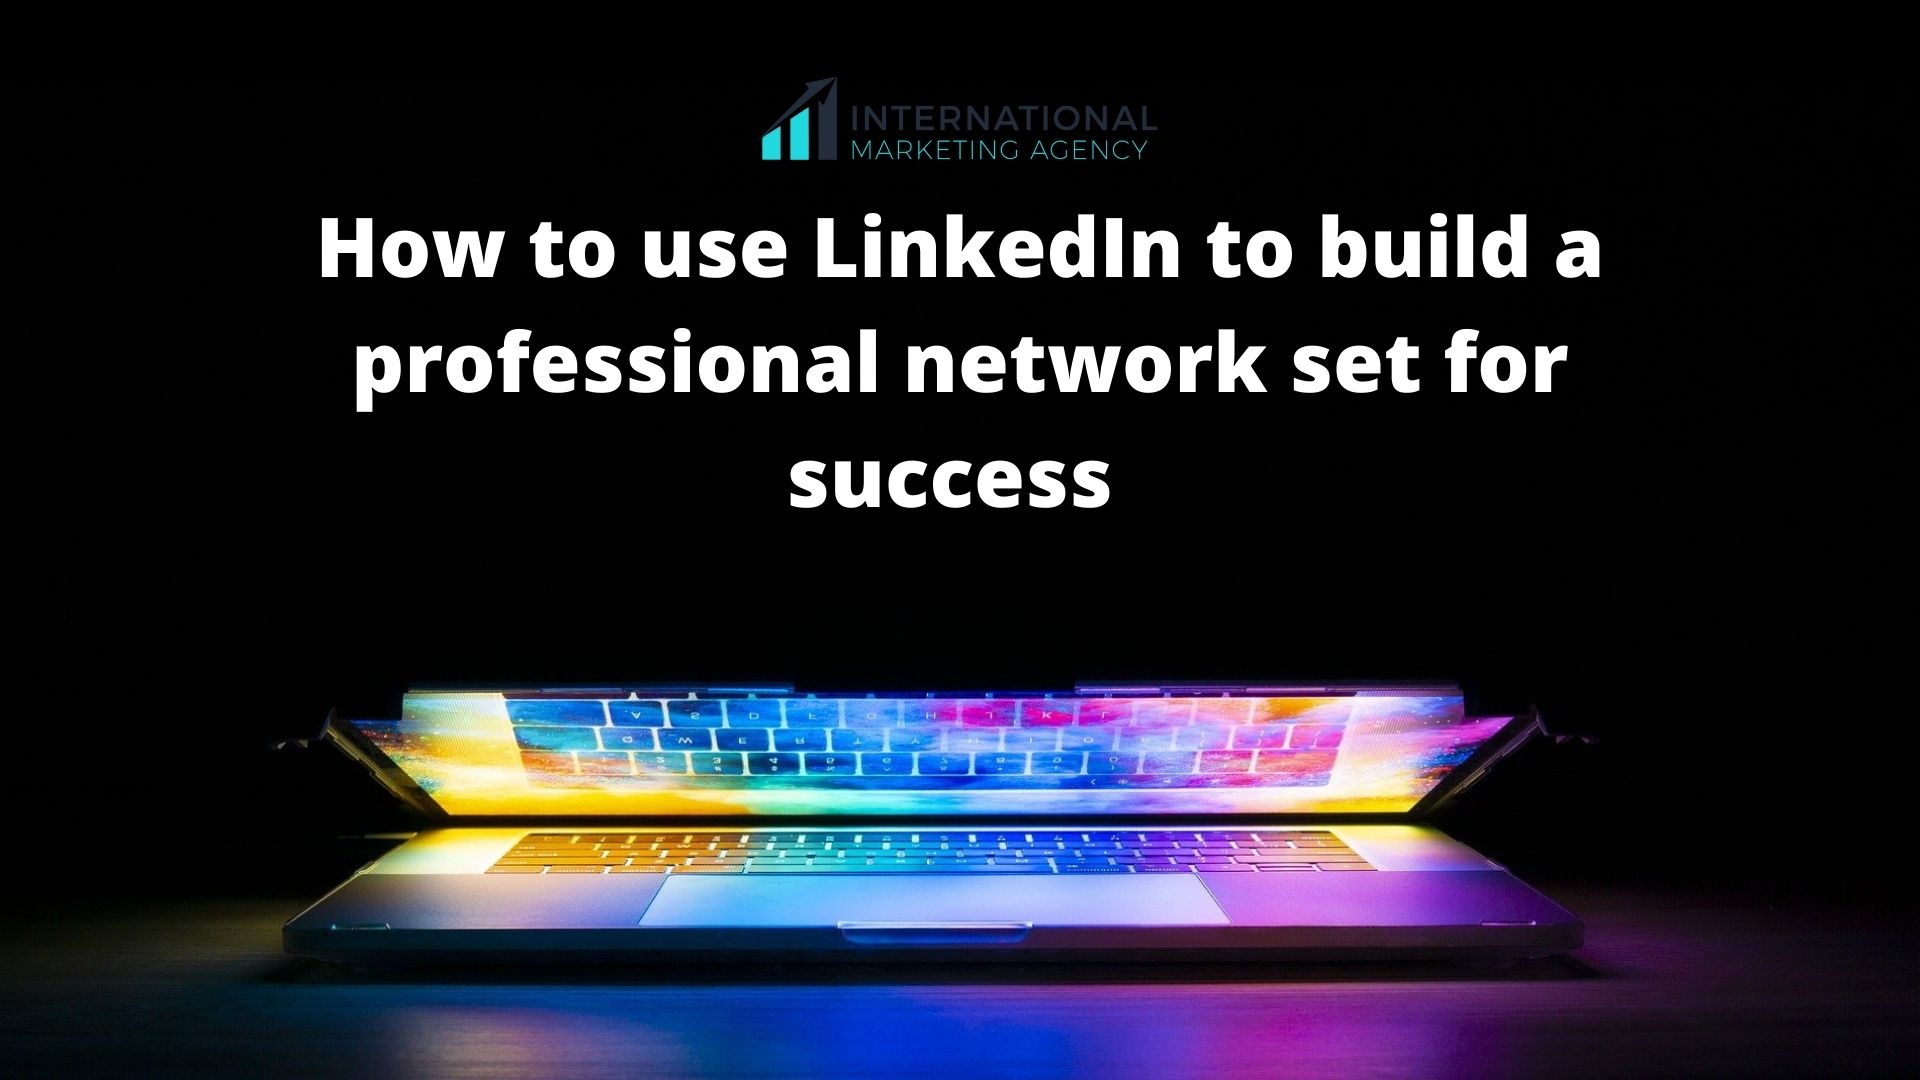 How to use LinkedIn to build a professional network set for success